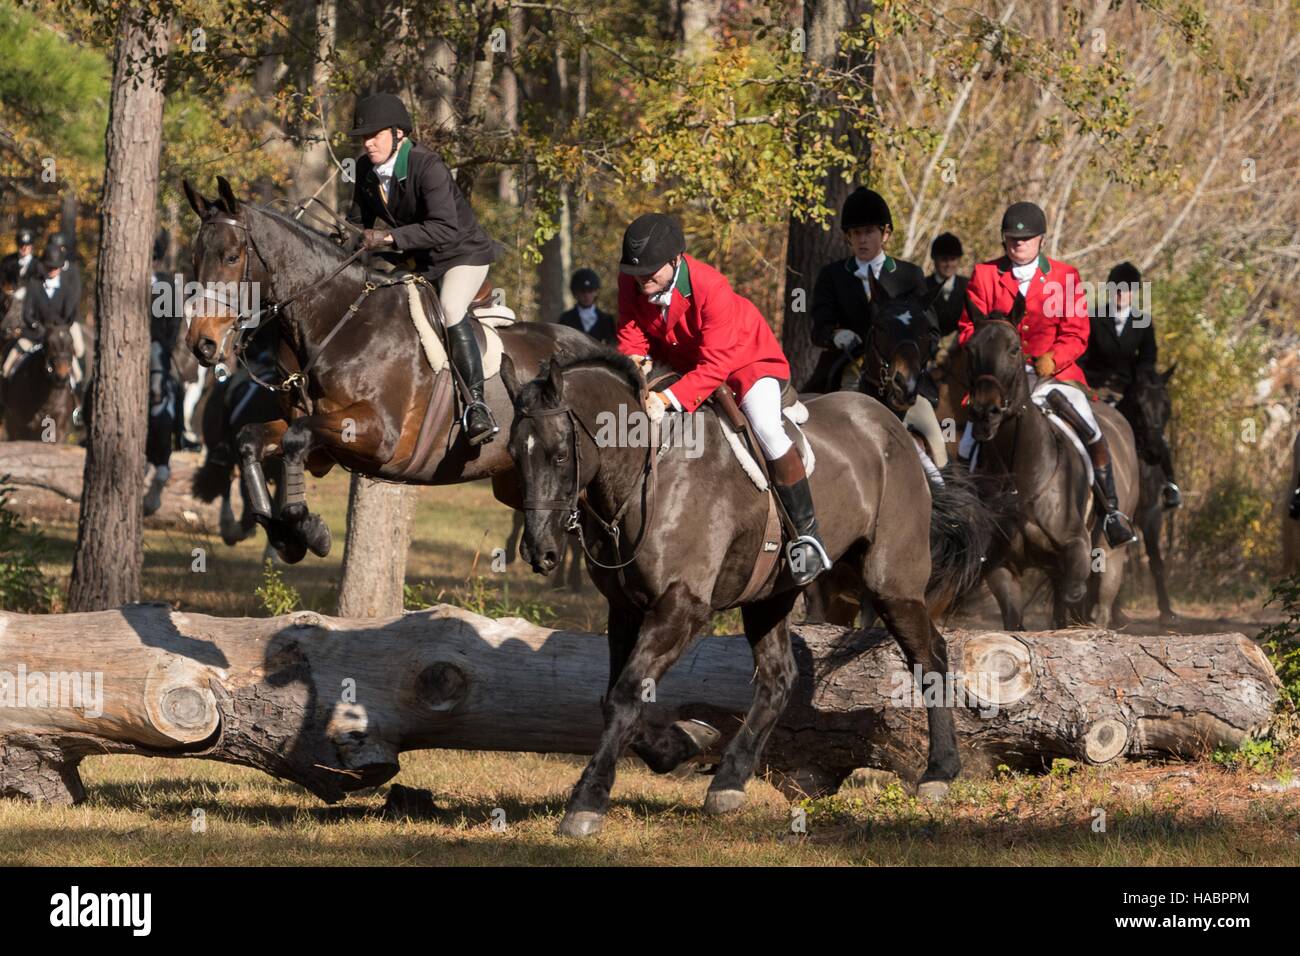 Riders jump a log during the start of the Fox Hunting season at Middleton Place Plantation November 27, 2016 in Charleston, SC. Fox hunting in Charleston is a drag hunt using a scented cloth to simulate a fox and no animals are injured. Stock Photo